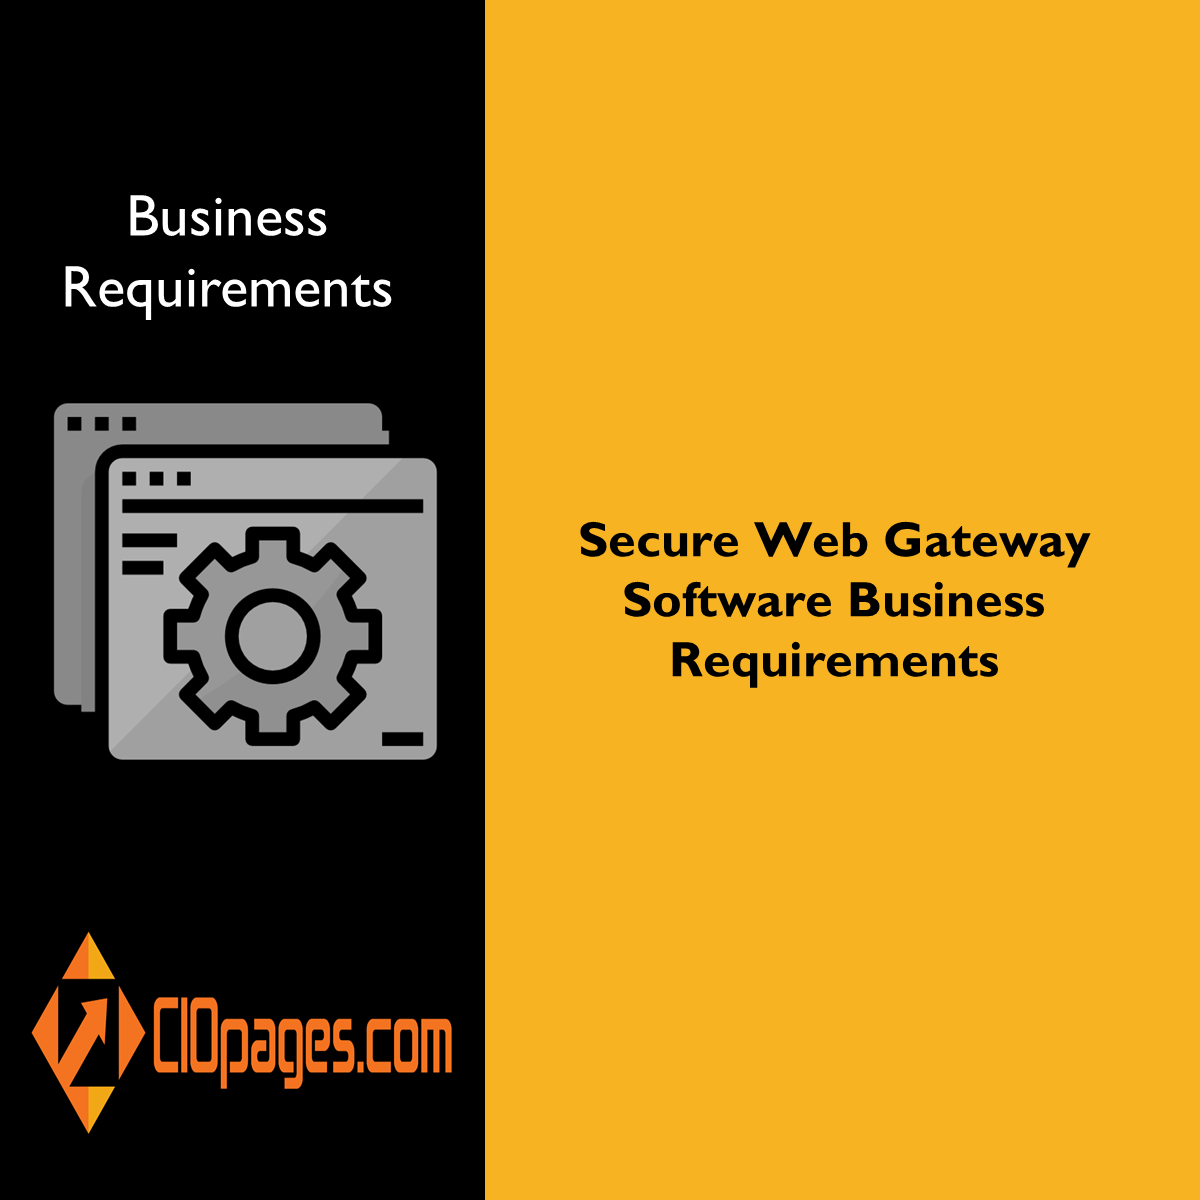 Secure Web Gateway Software Business Requirements